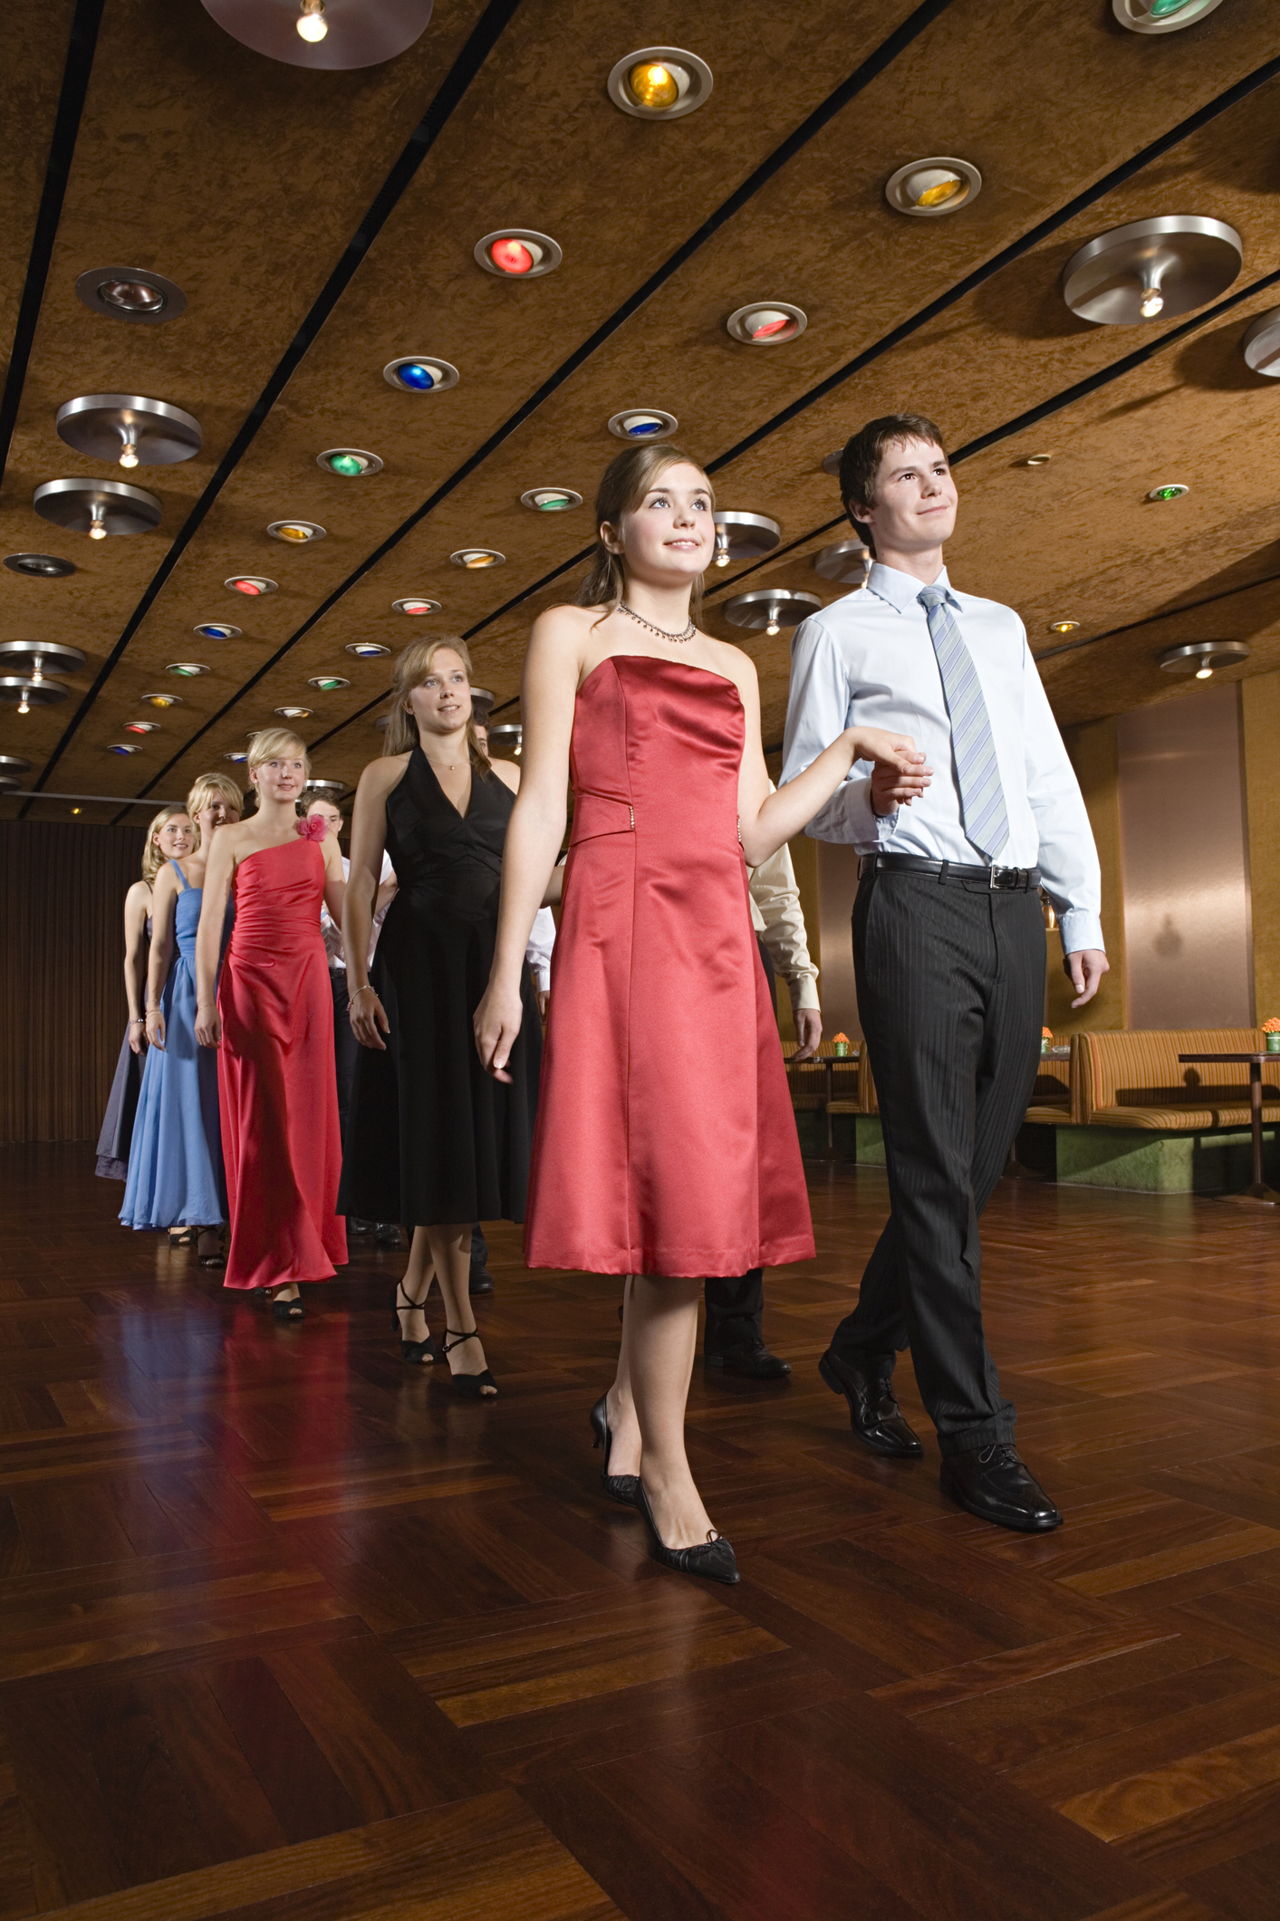 Beginners, Keep Grooving With These Awesome Line Dancing Steps